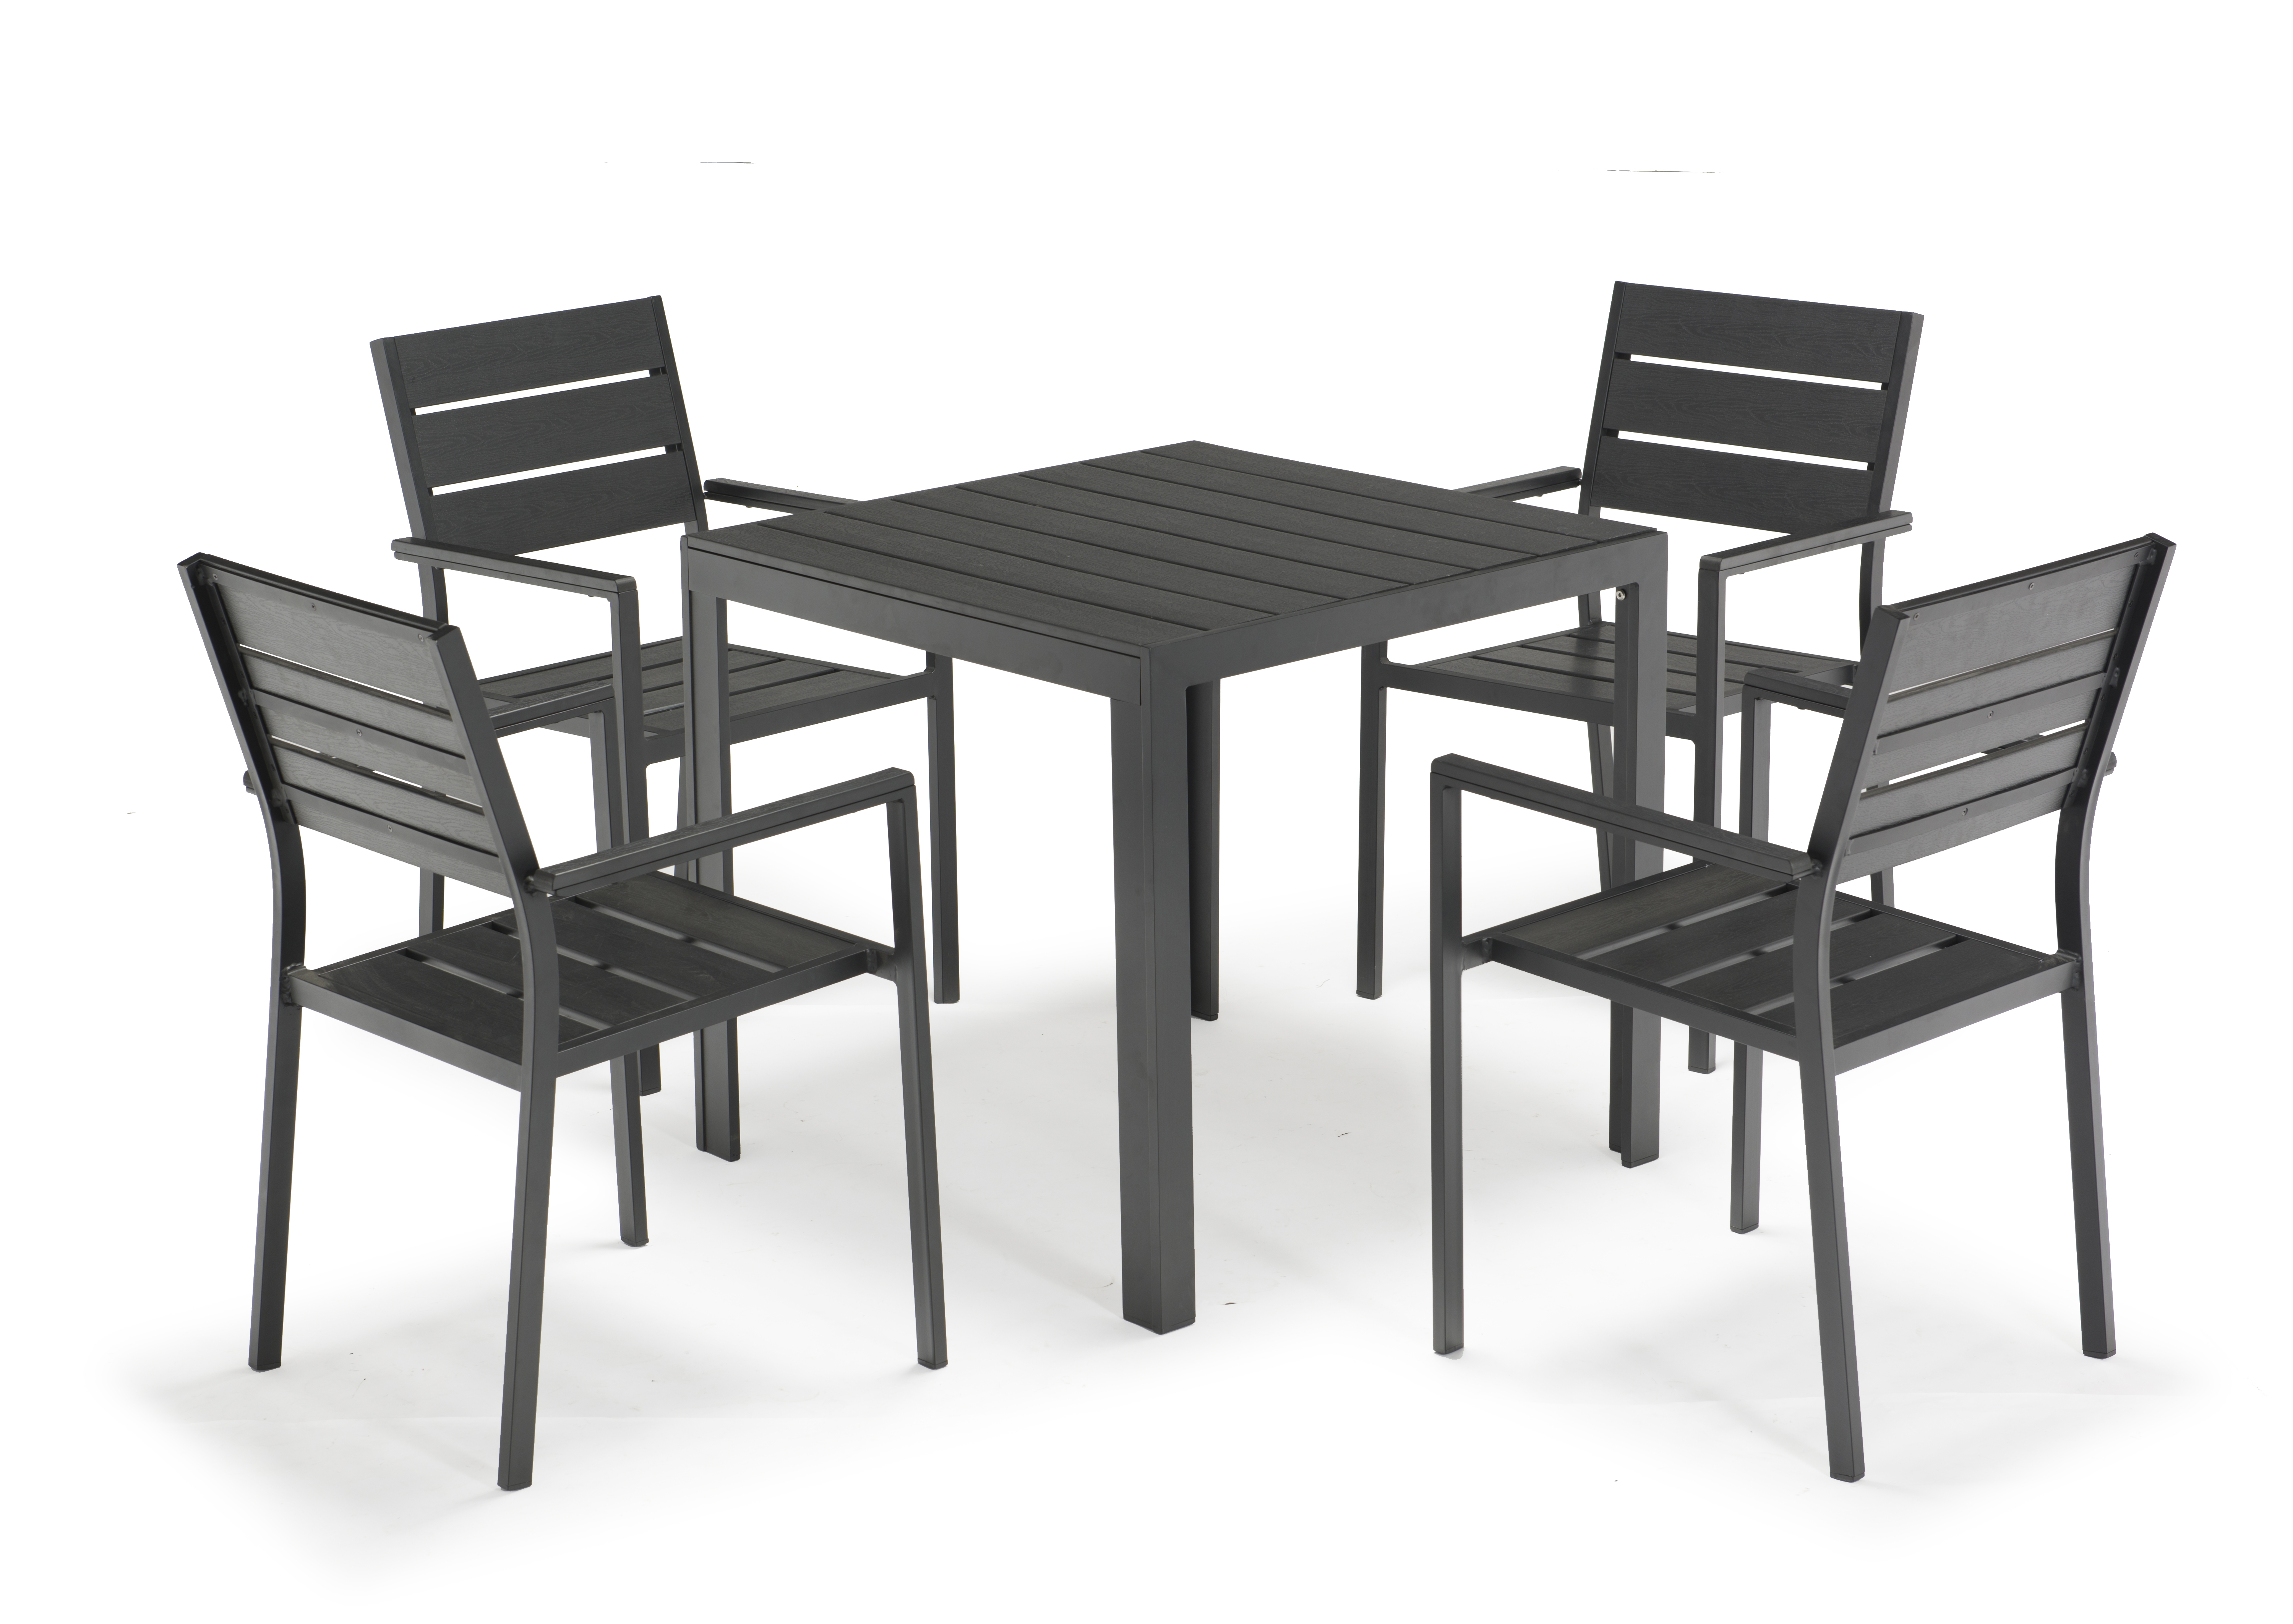 Uplion garden weather resistant plastic Wood composite outdoor table and chair furniture set